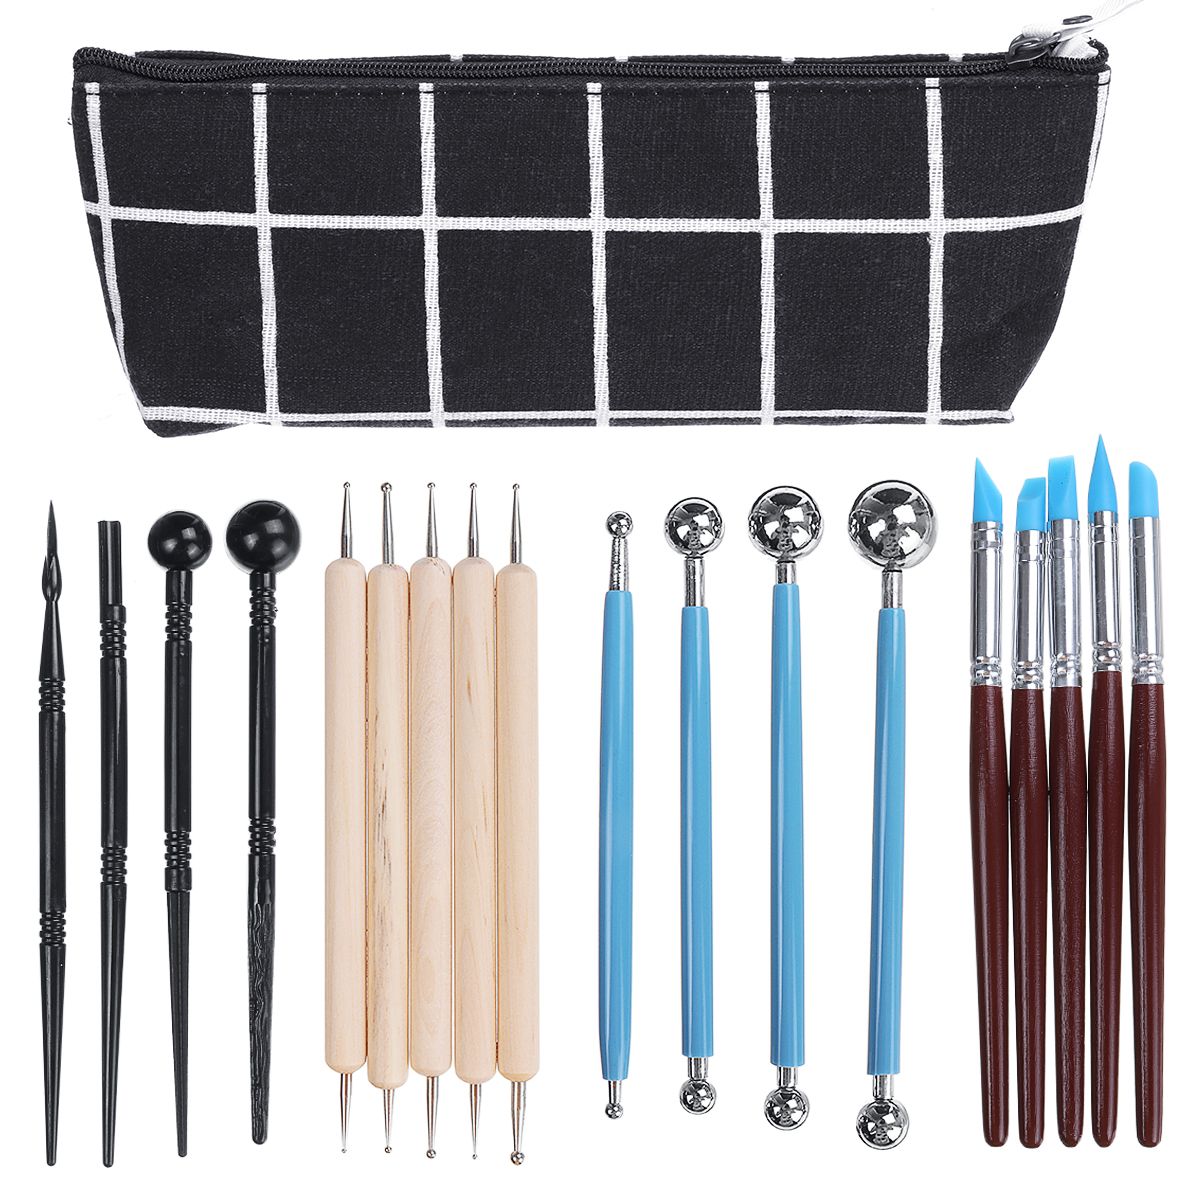 18pcs-Clay-Sculpting-Carving-Pottery-Tools-Kit-Wax-Polymer-Shapers-Modeling-DIY-Craft-1517939